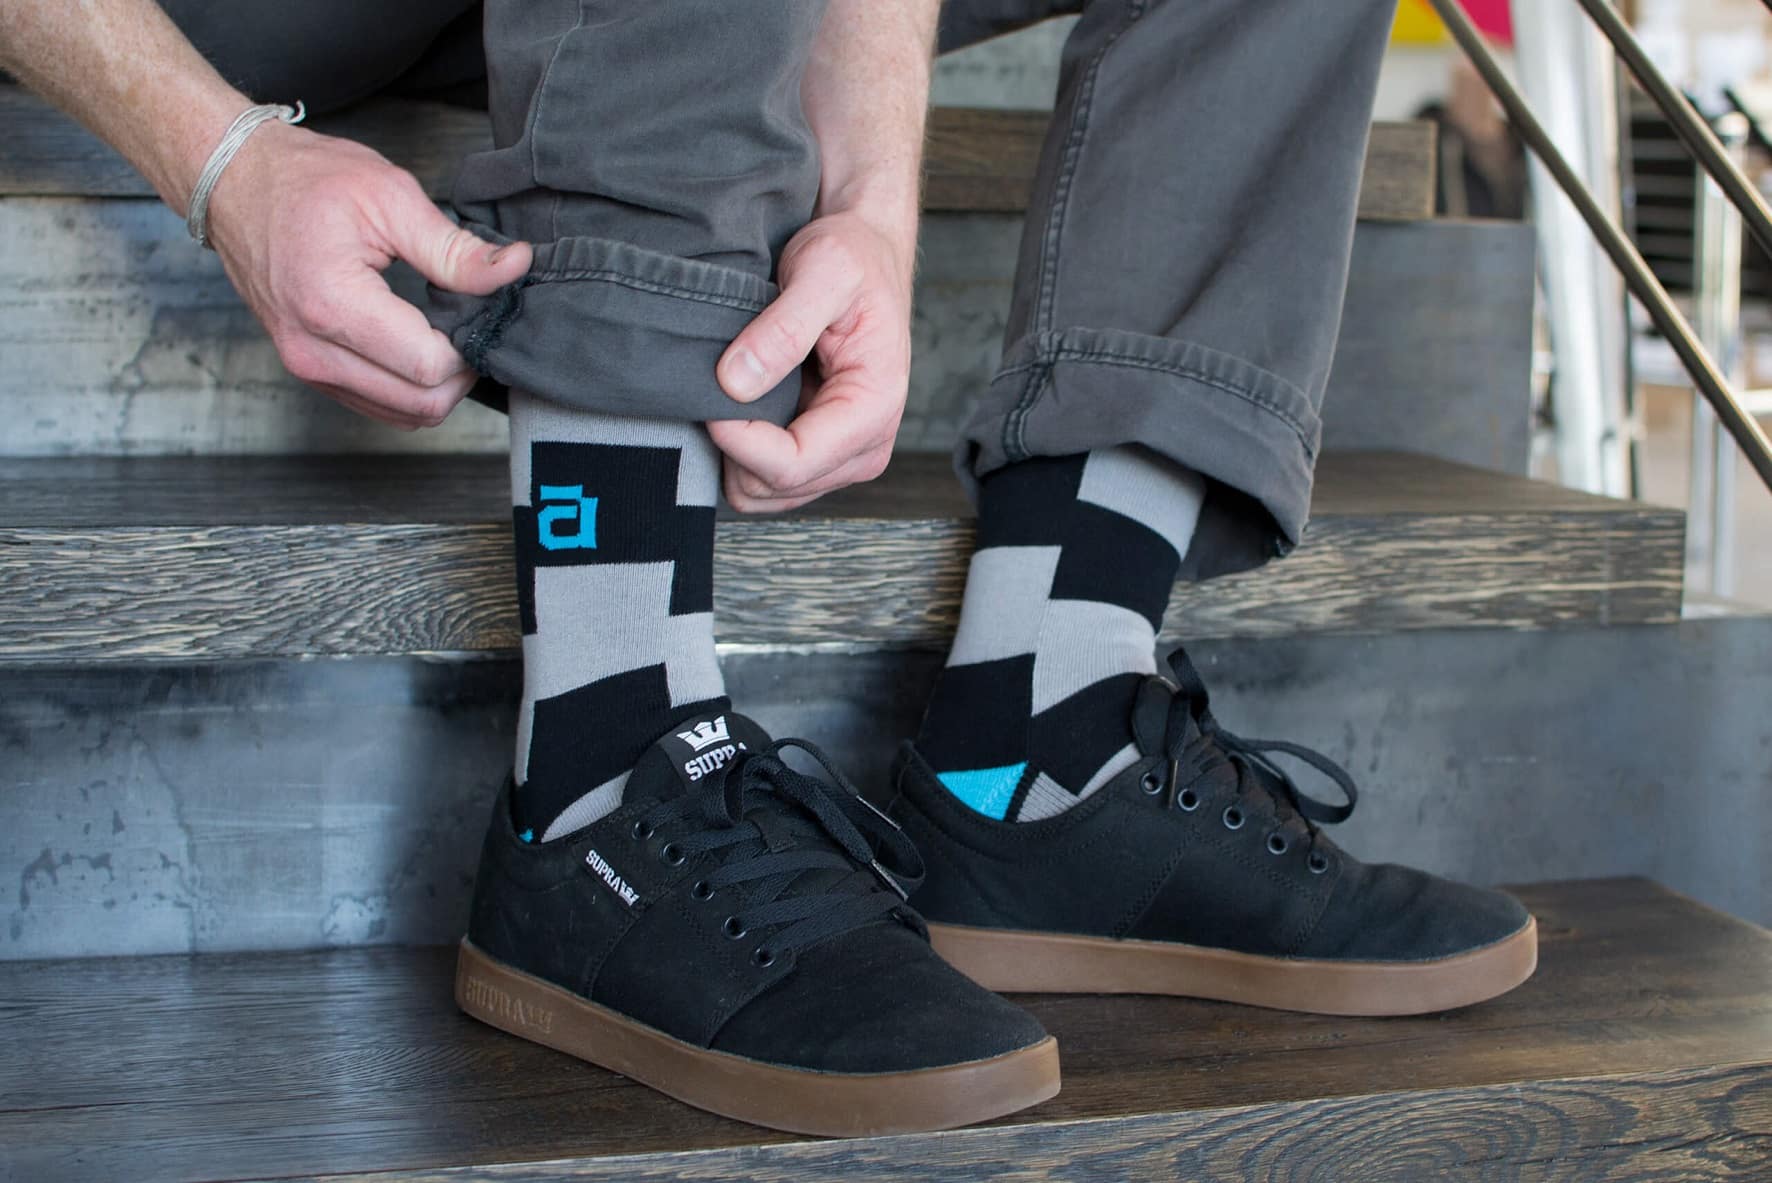 Why Custom Socks are a Great Way to Market Your Brand